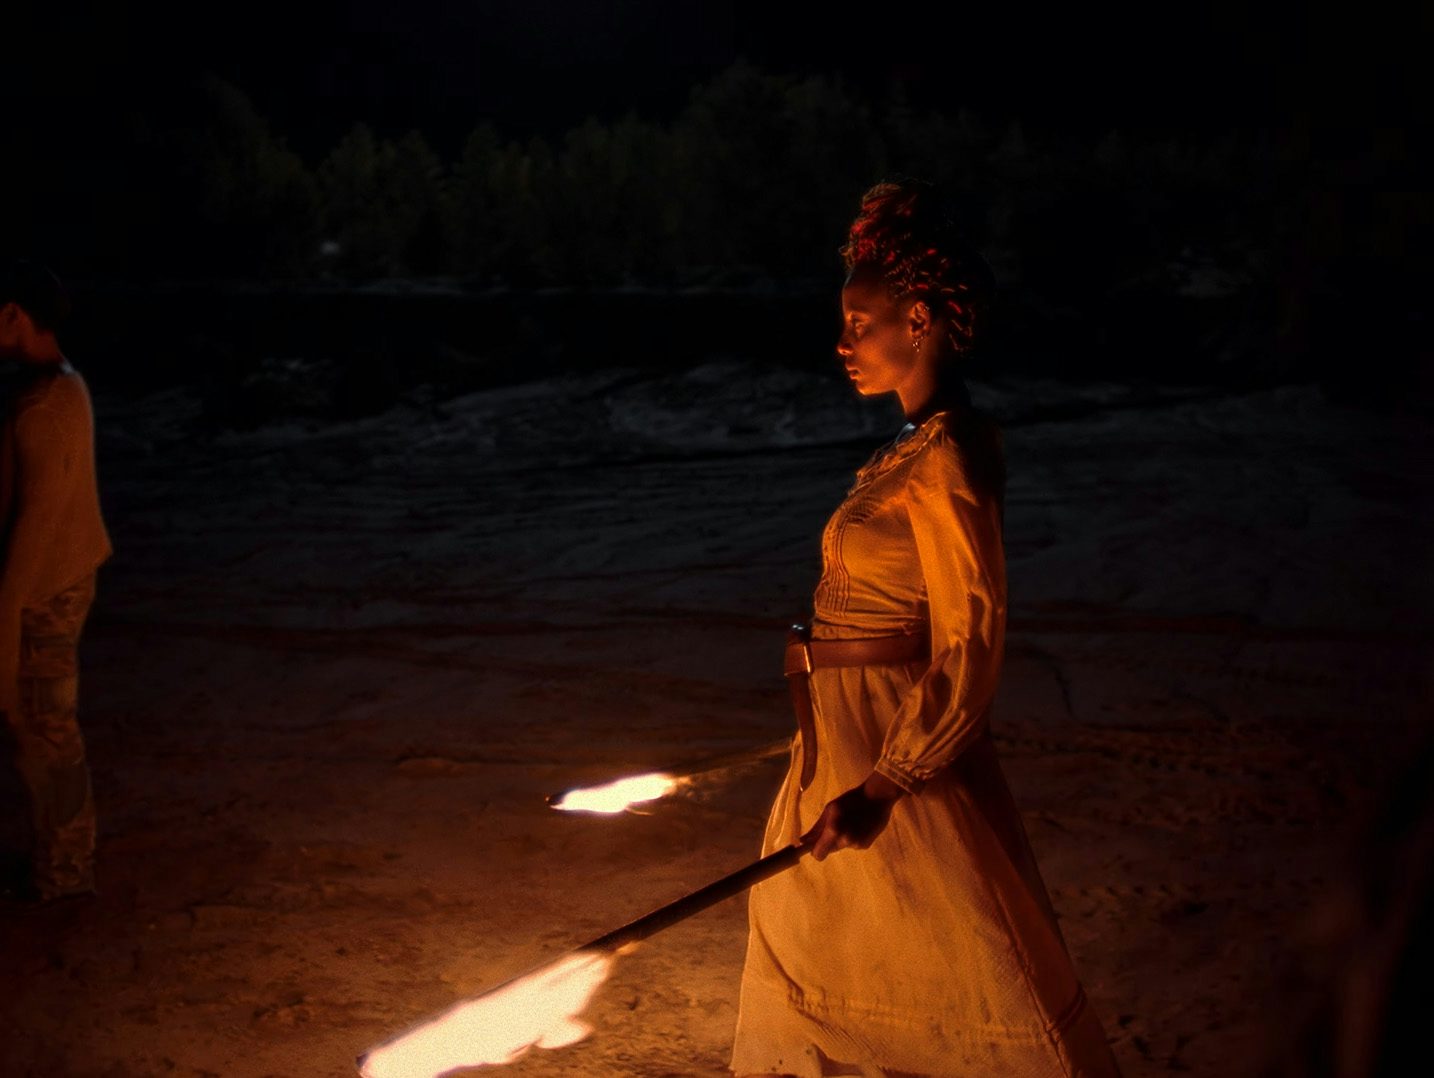 Image shows a person carrying two batons on fire in the music video for I Saw by Young Fathers